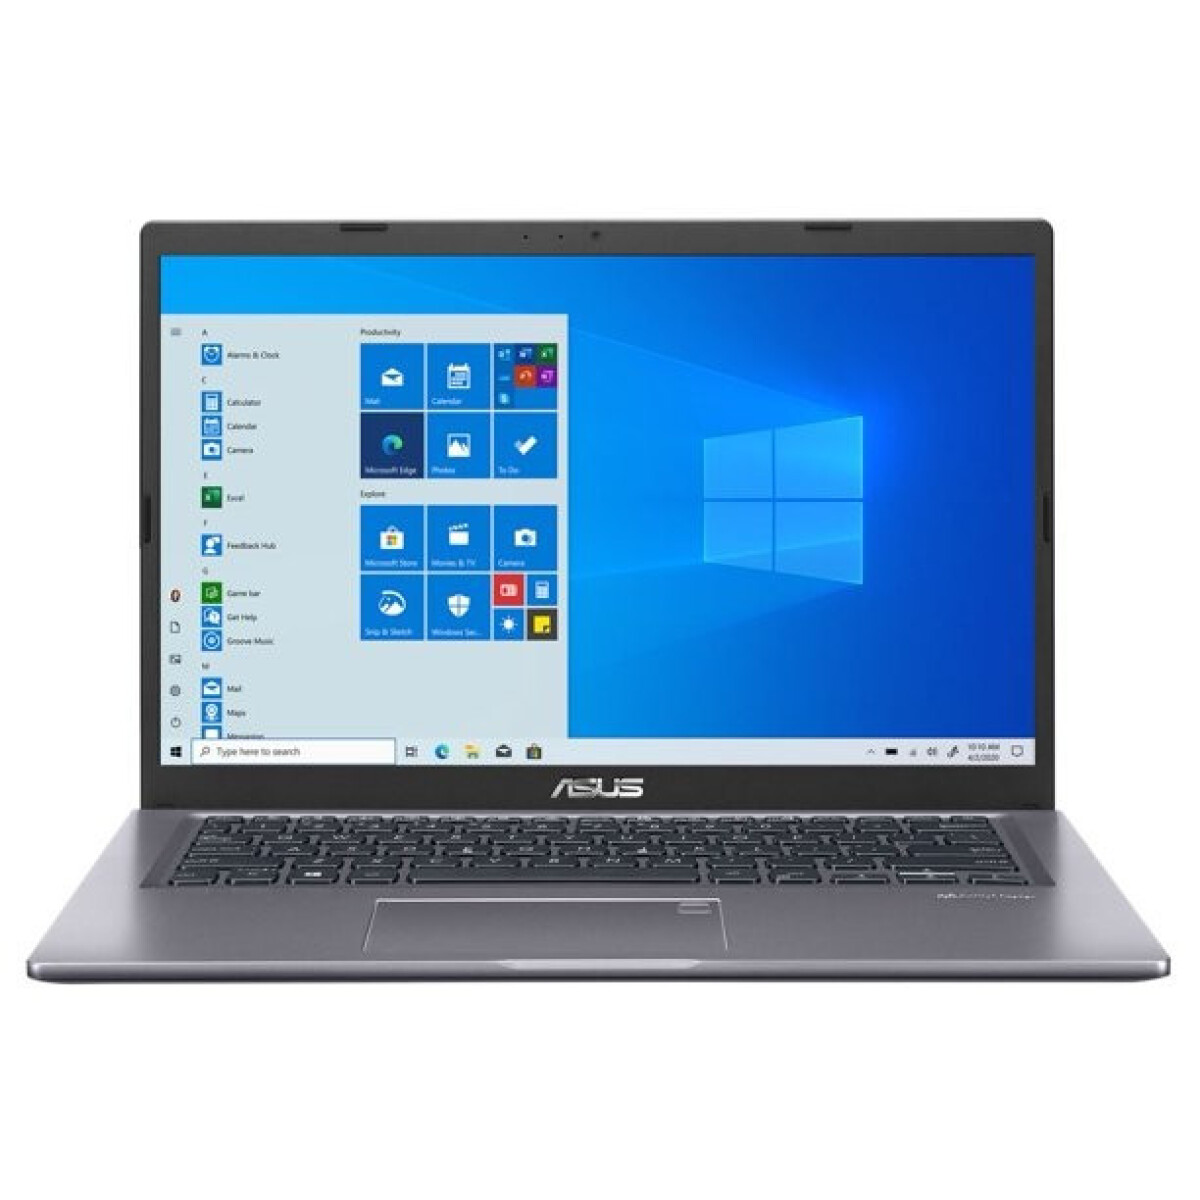 Notebook Asus F415 I3 4gb 128ssd 